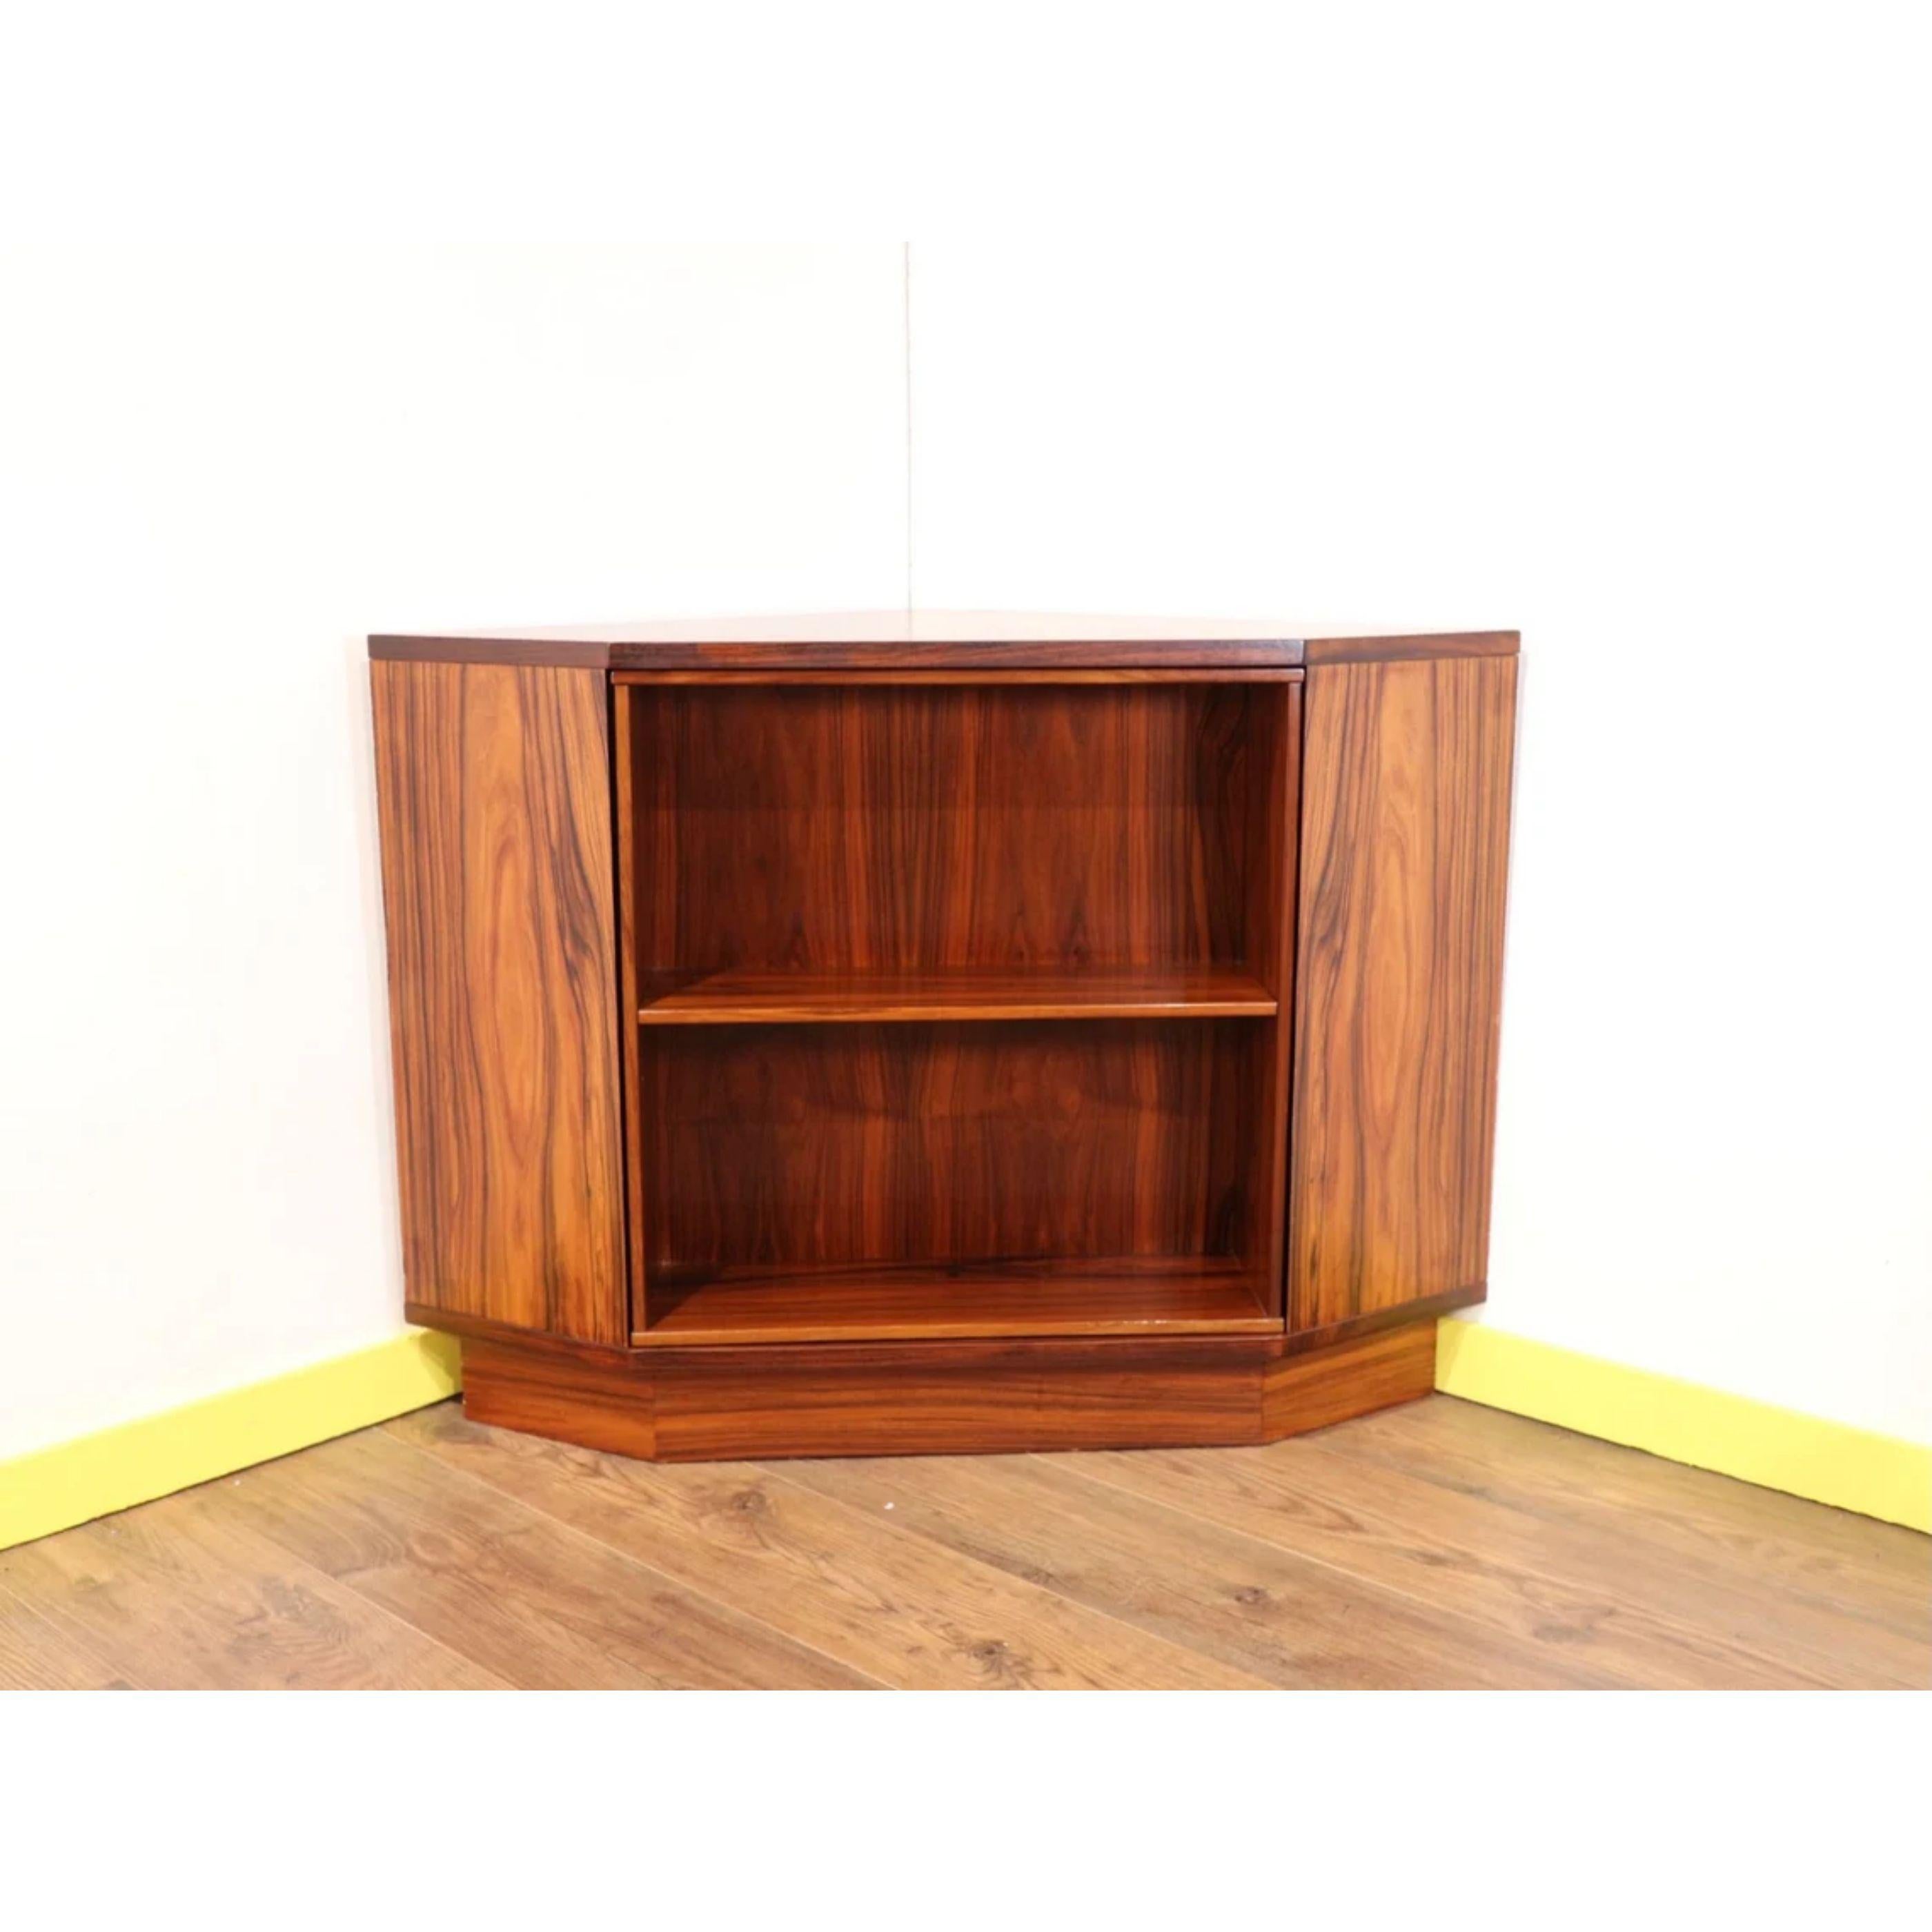 This fabulous mid-century corner revolving secret bar is an fabulous an piece of furniture. This is Danish design and quality summed up in one piece. The Cabinet features an amazing revolving drinks bar and display cabinet so you can eith display